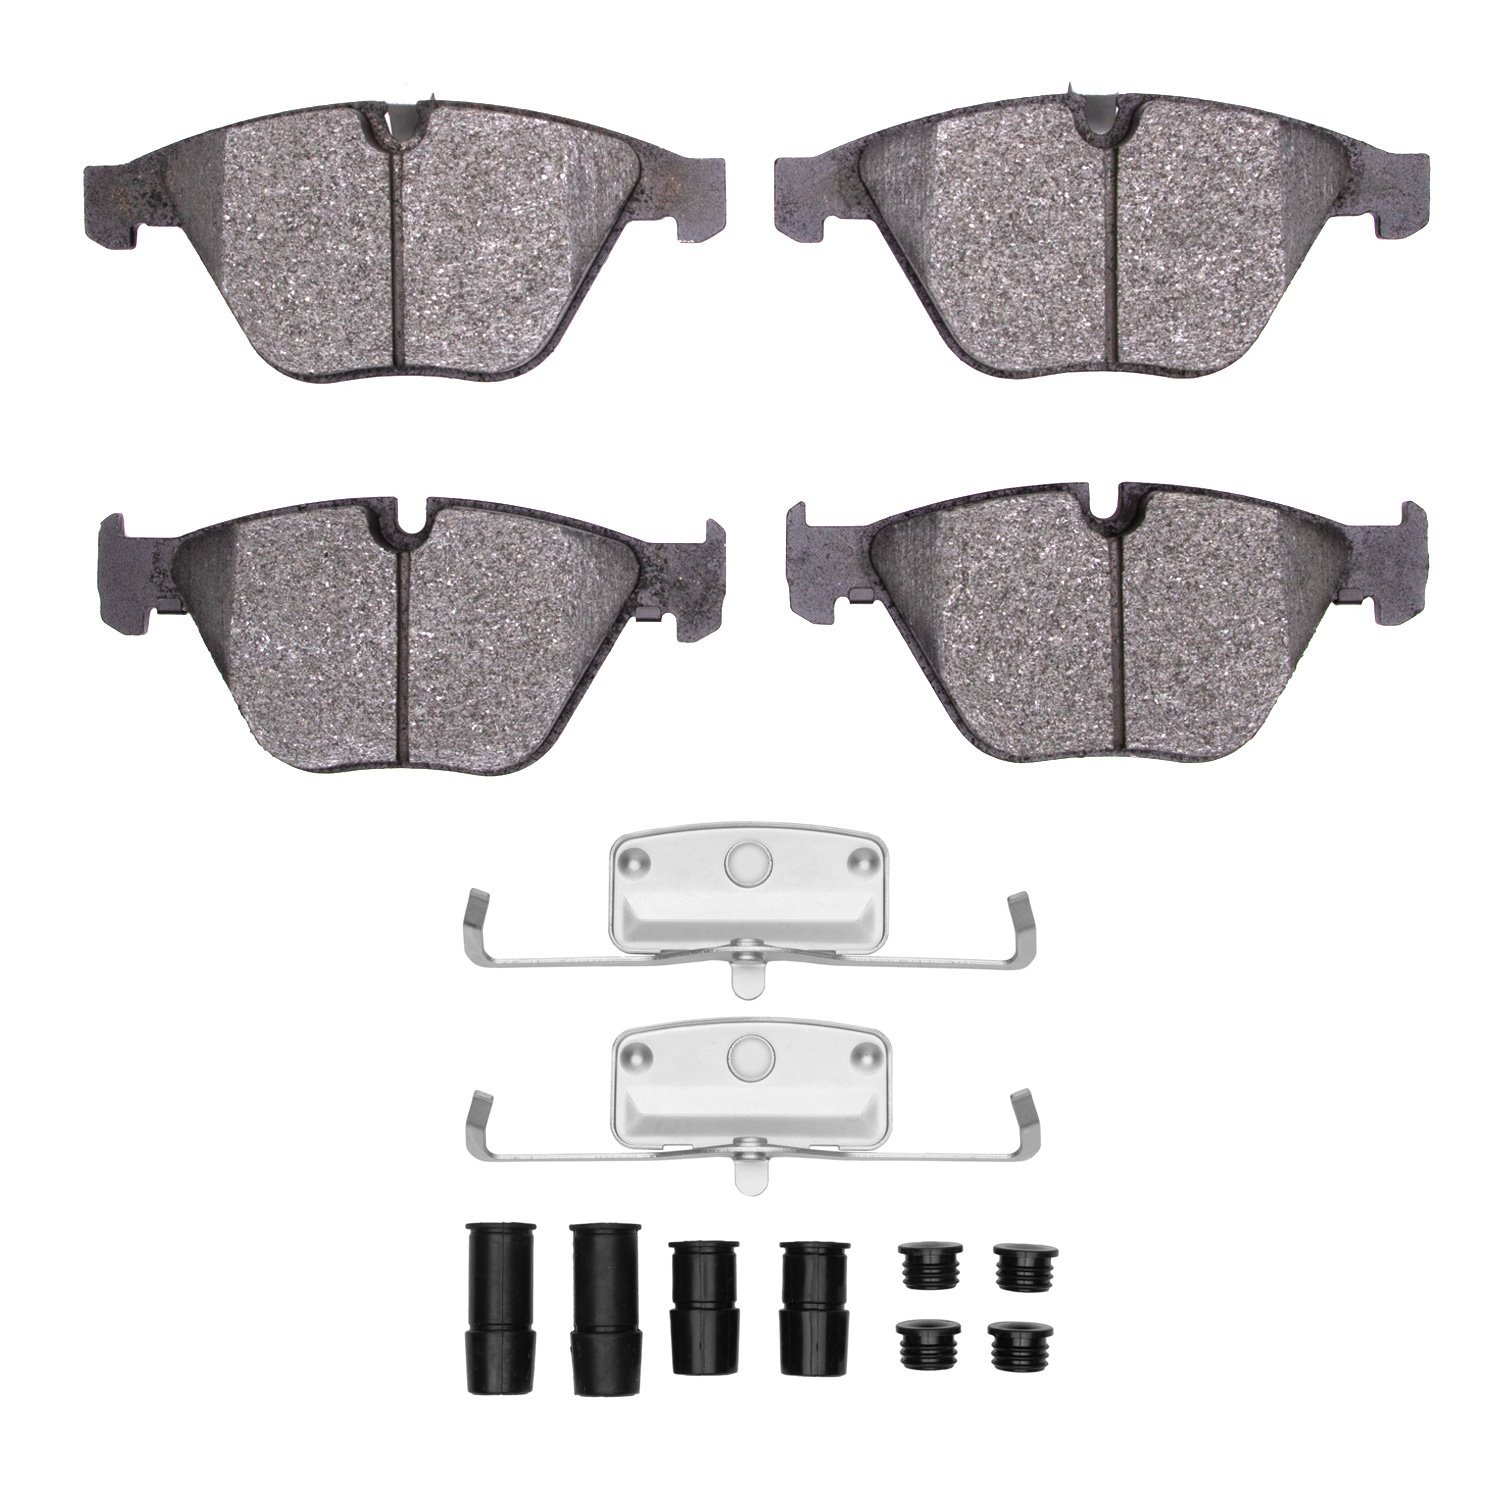 1115-0918-11 Active Performance Brake Pads & Hardware Kit, Fits Select BMW, Position: Front